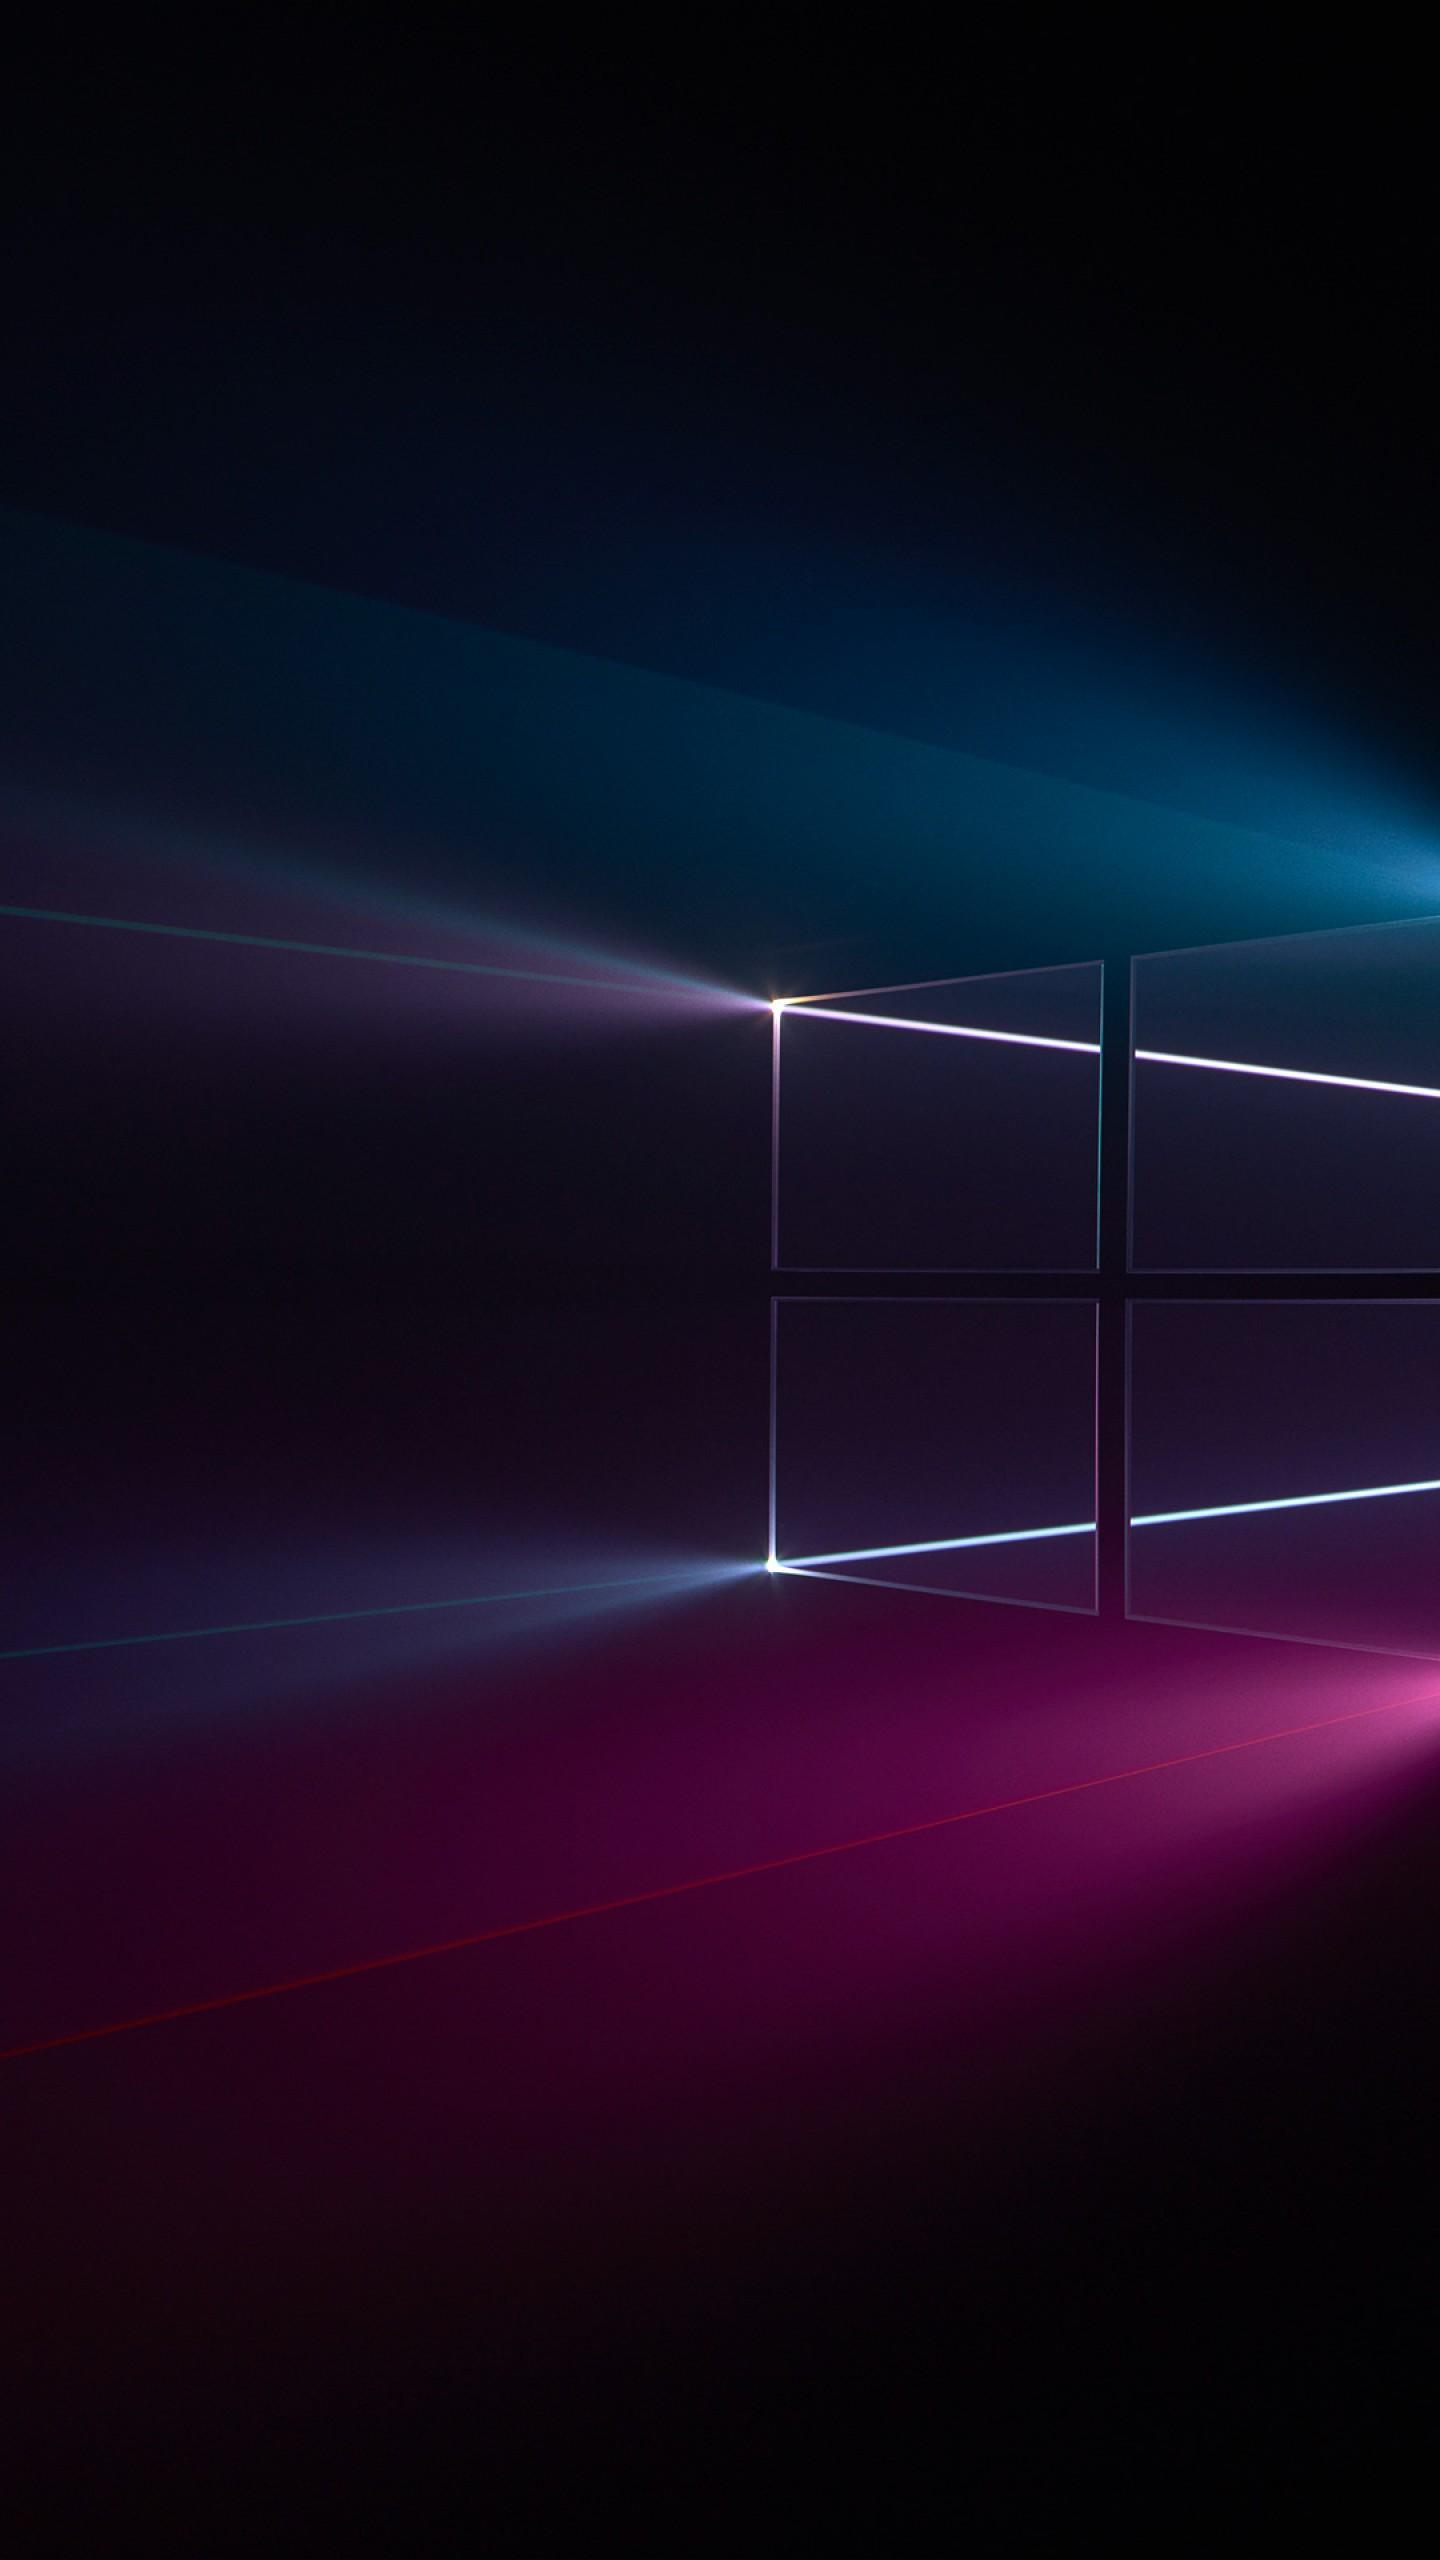 Wallpaper Windows Windows logo, Blue, Pink, Dark, HD, Technology,. Wallpaper for iPhone, Android, Mobile and Desktop